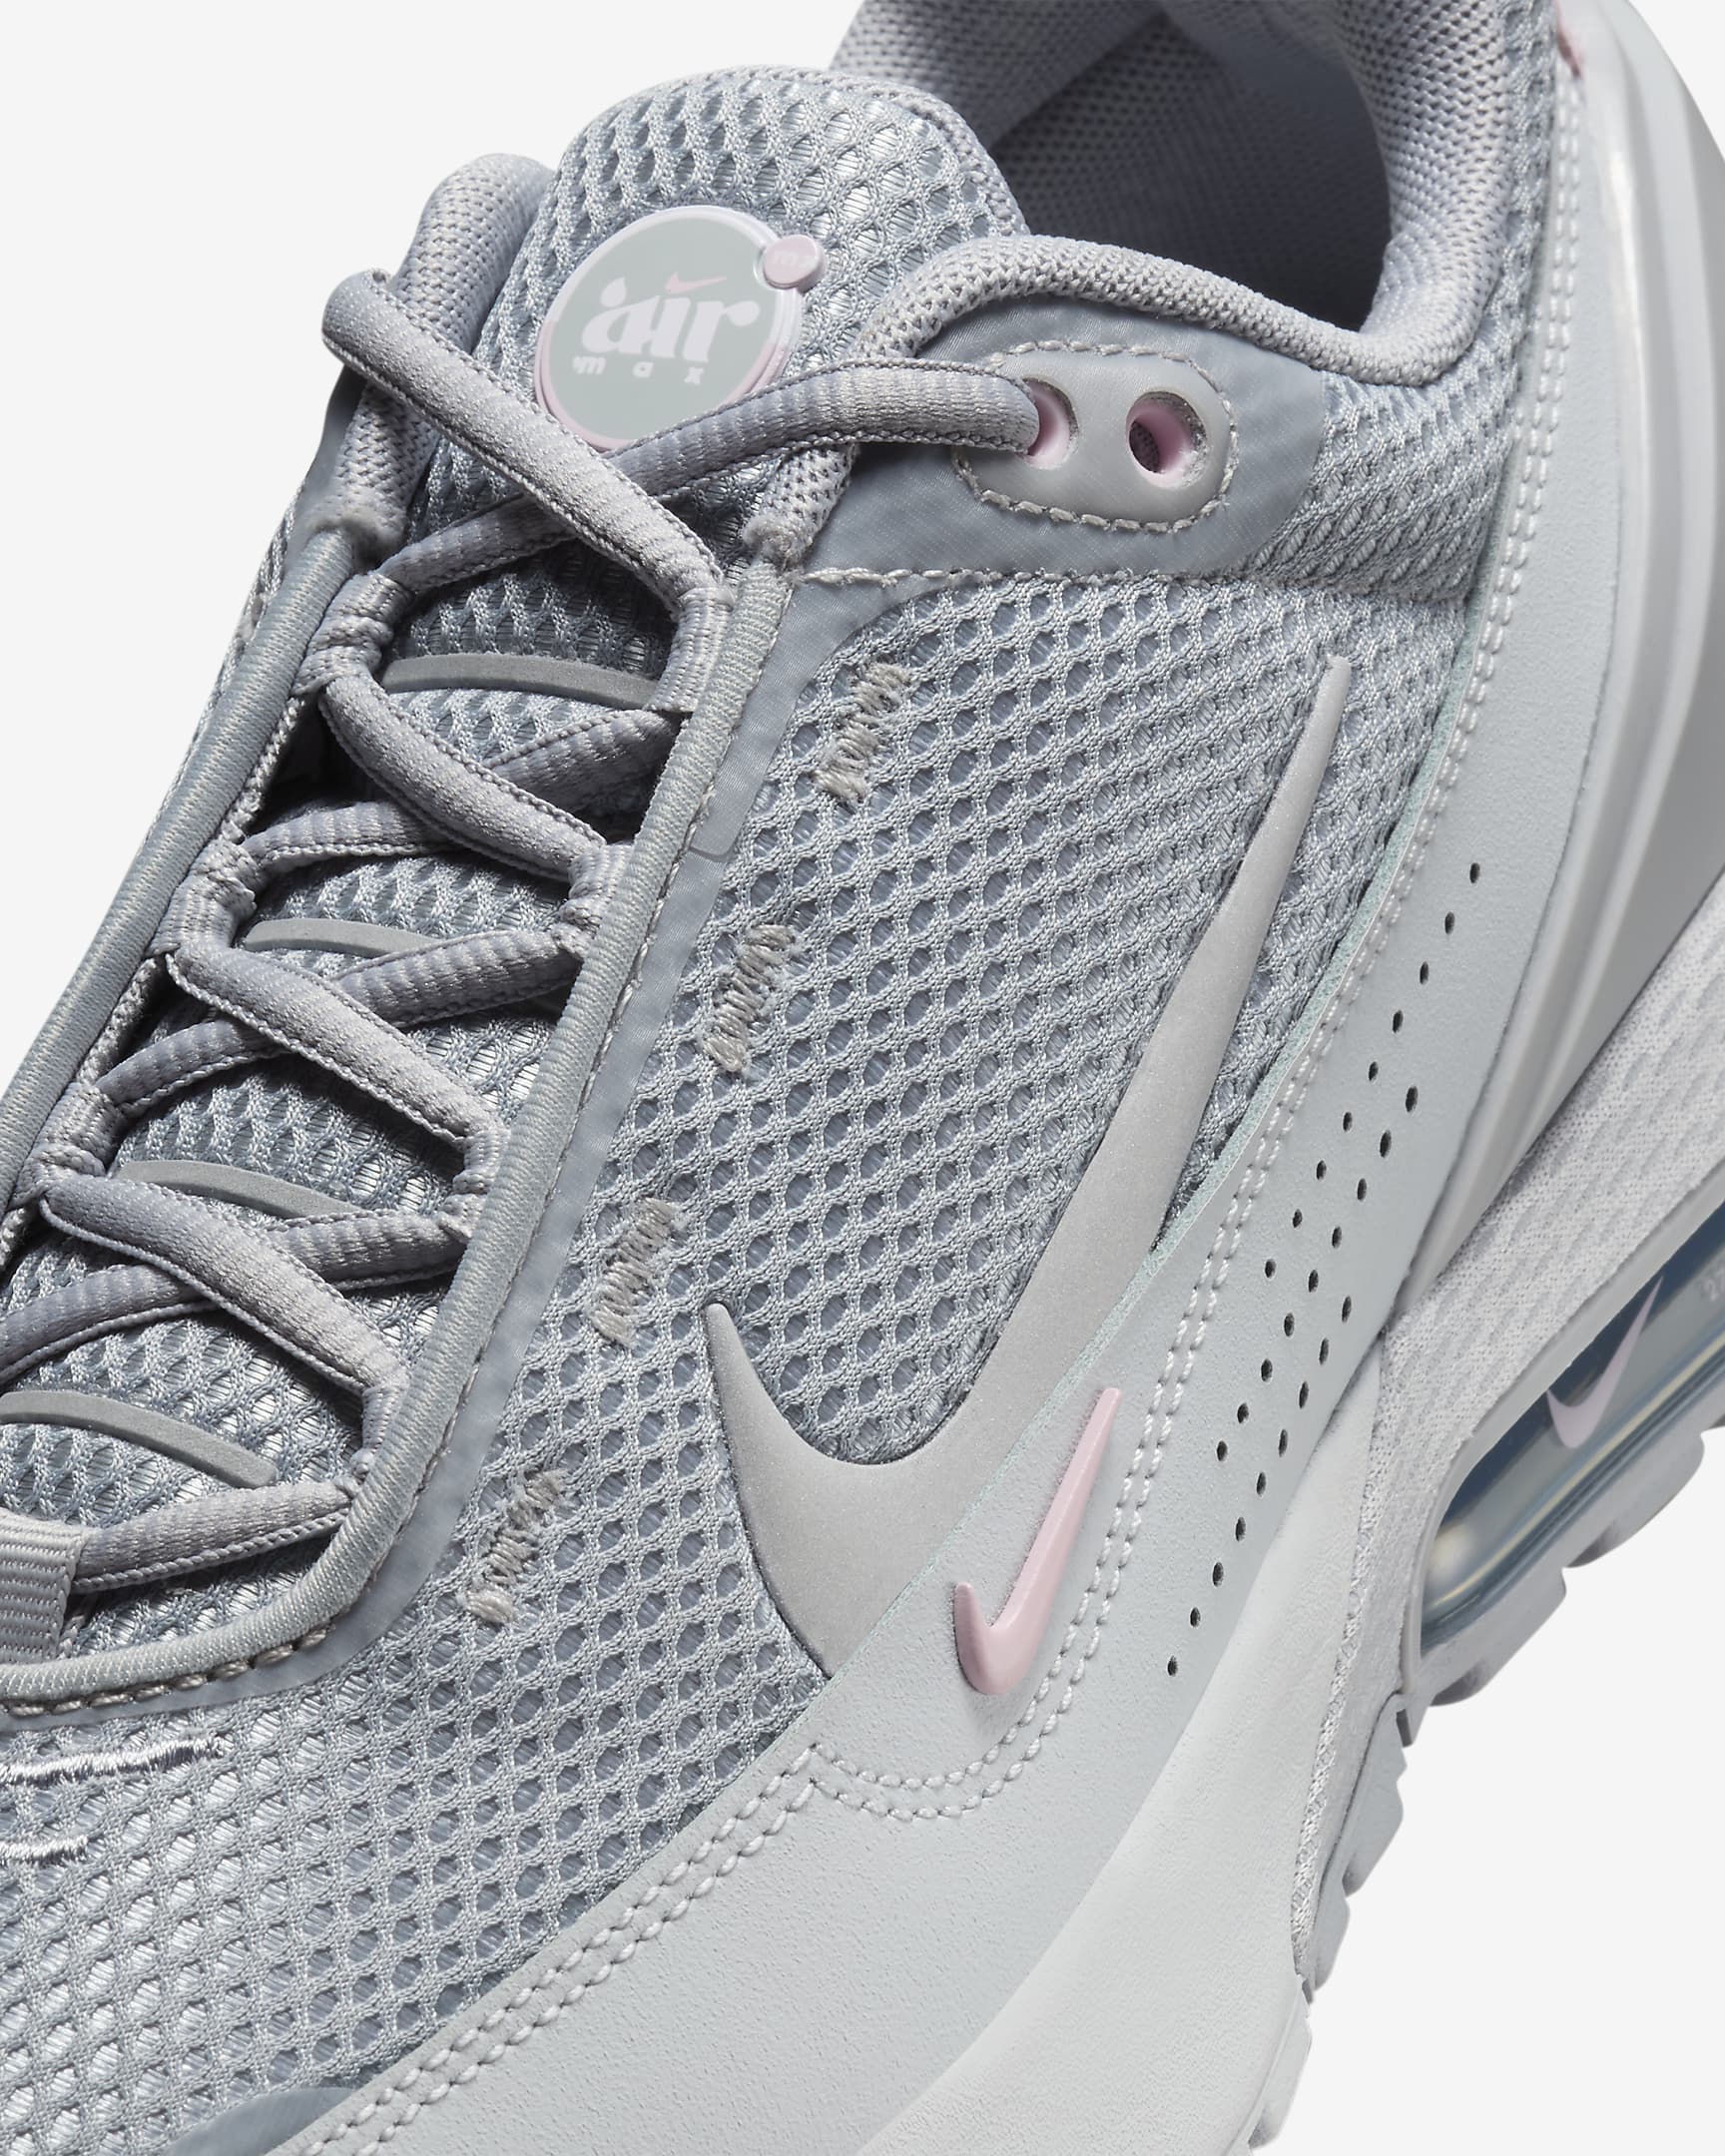 Chaussure Nike Air Max Pulse pour femme - Wolf Grey/Pure Platinum/Blanc/Pink Foam